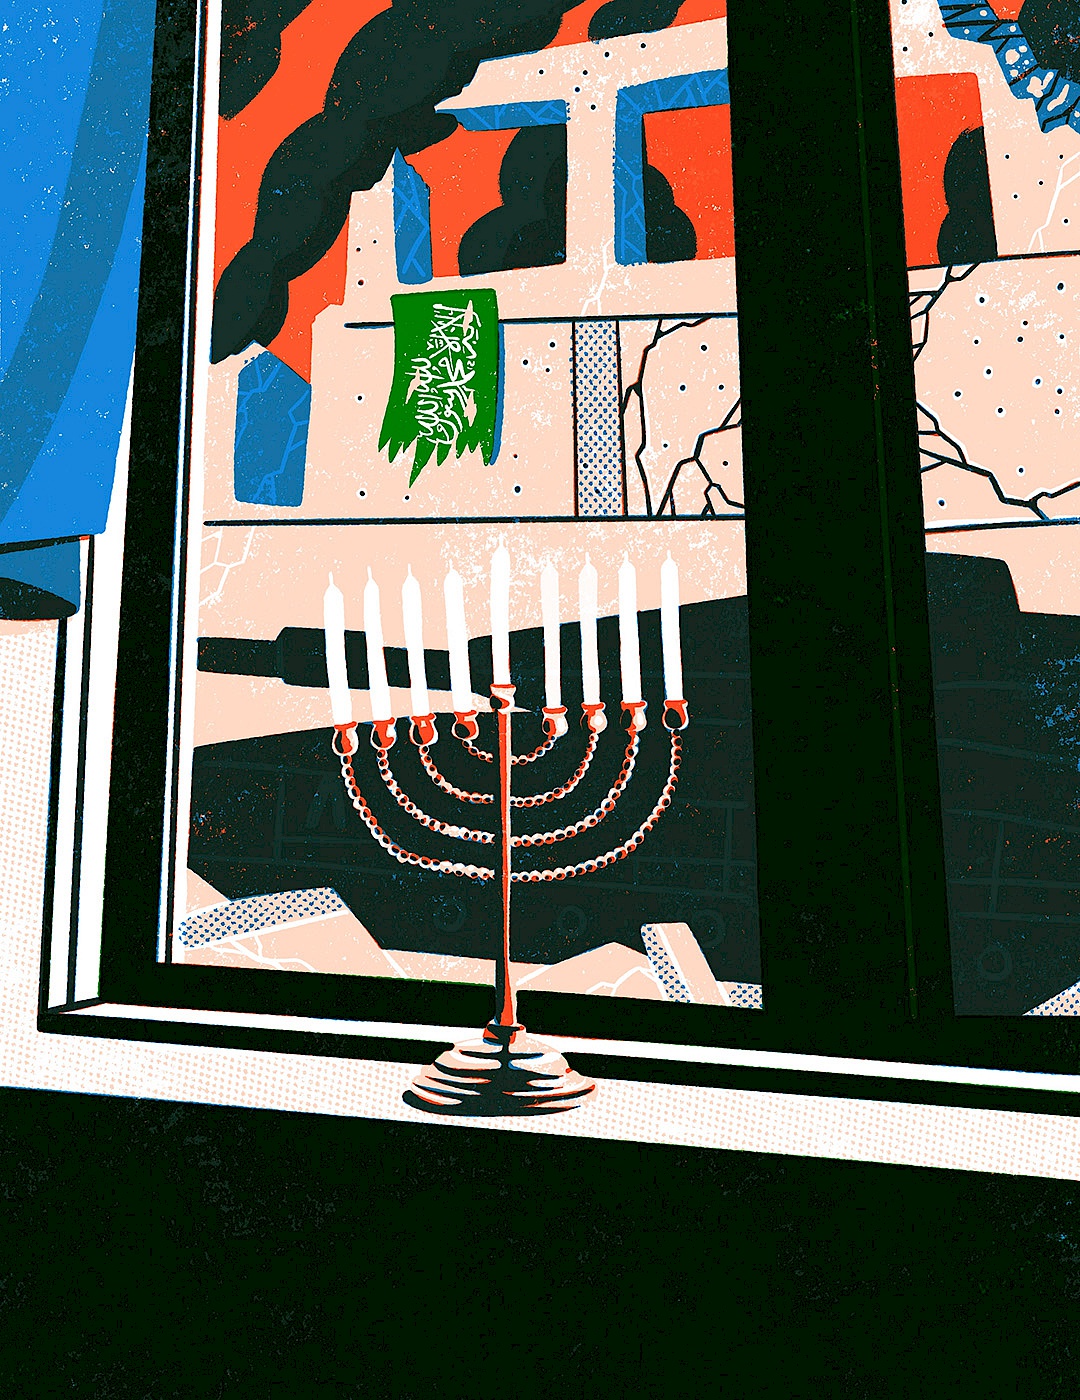 A graphic representation of a candleholder (a menorah) in front of a window.